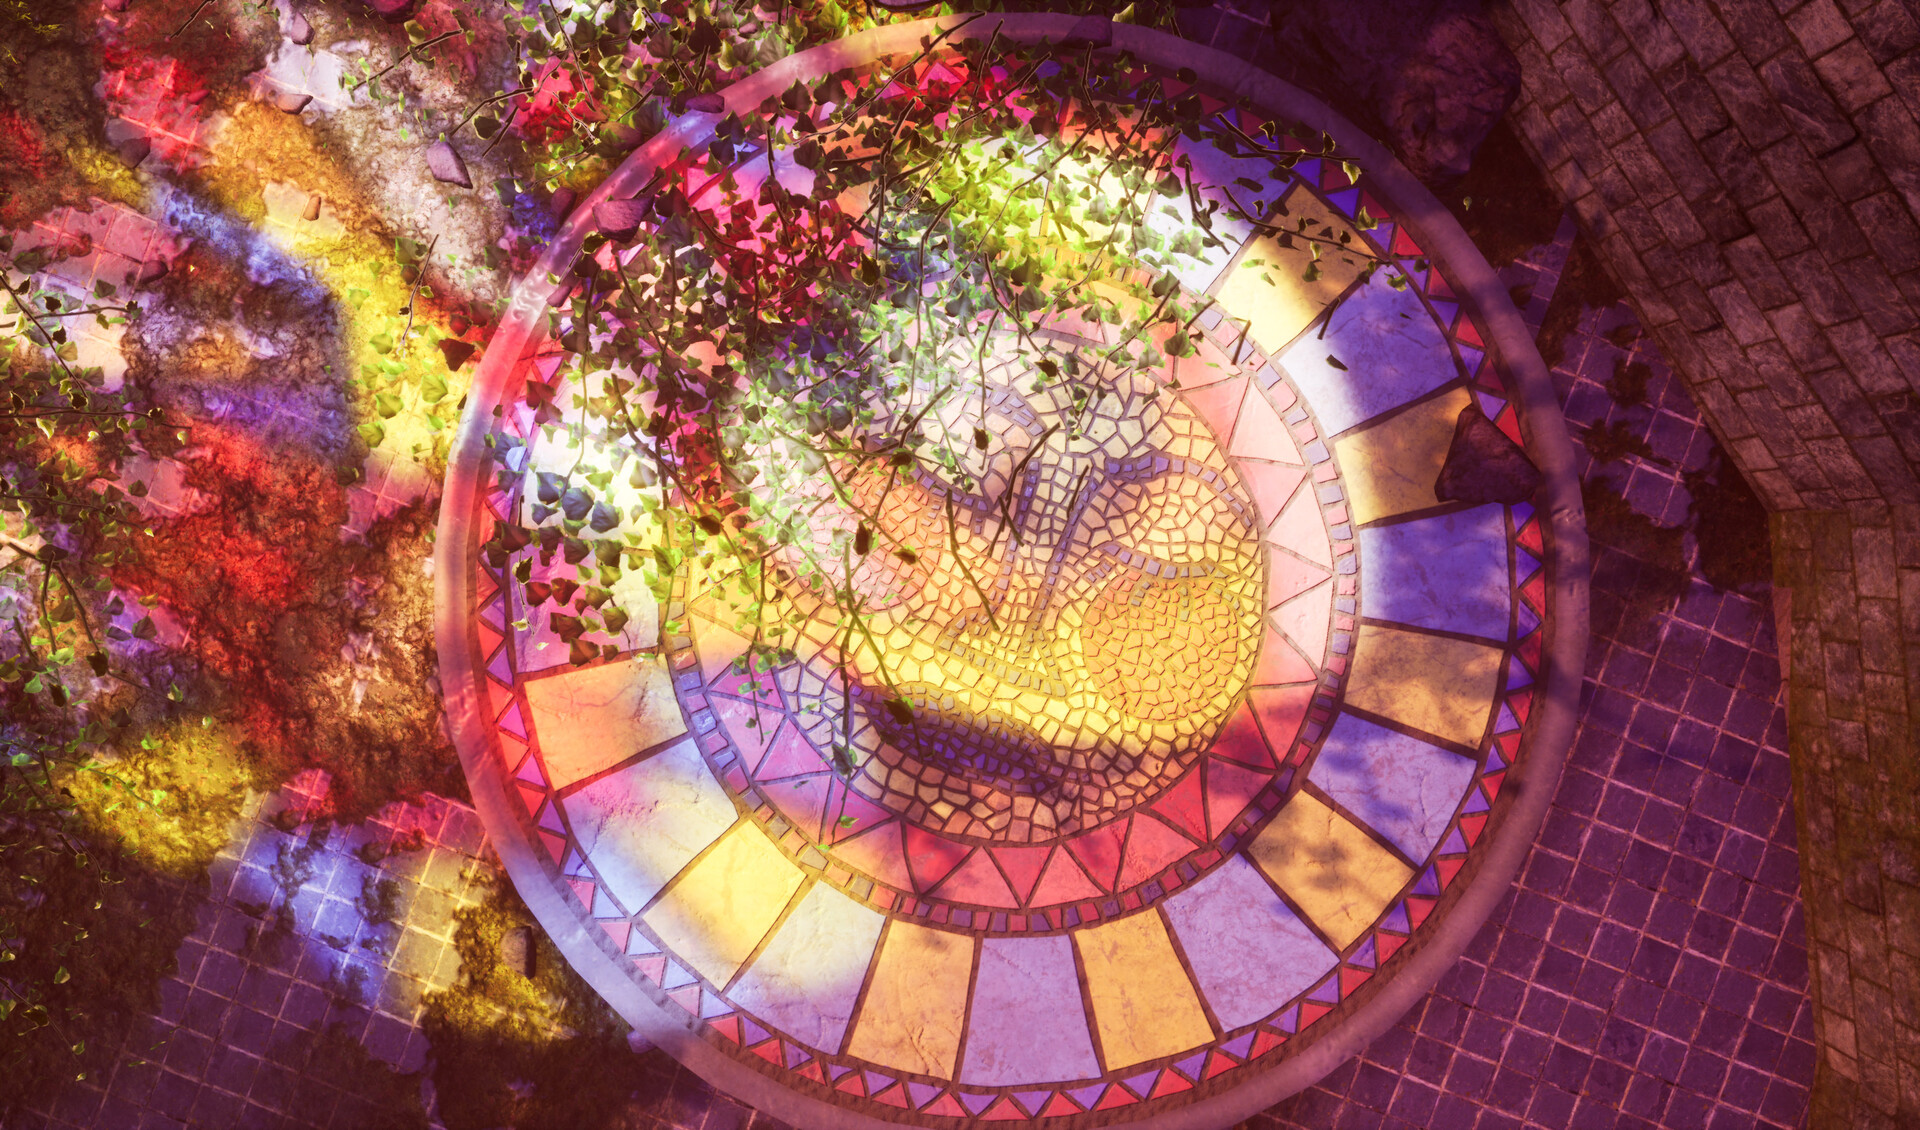 ArtStation - Stained glass windows